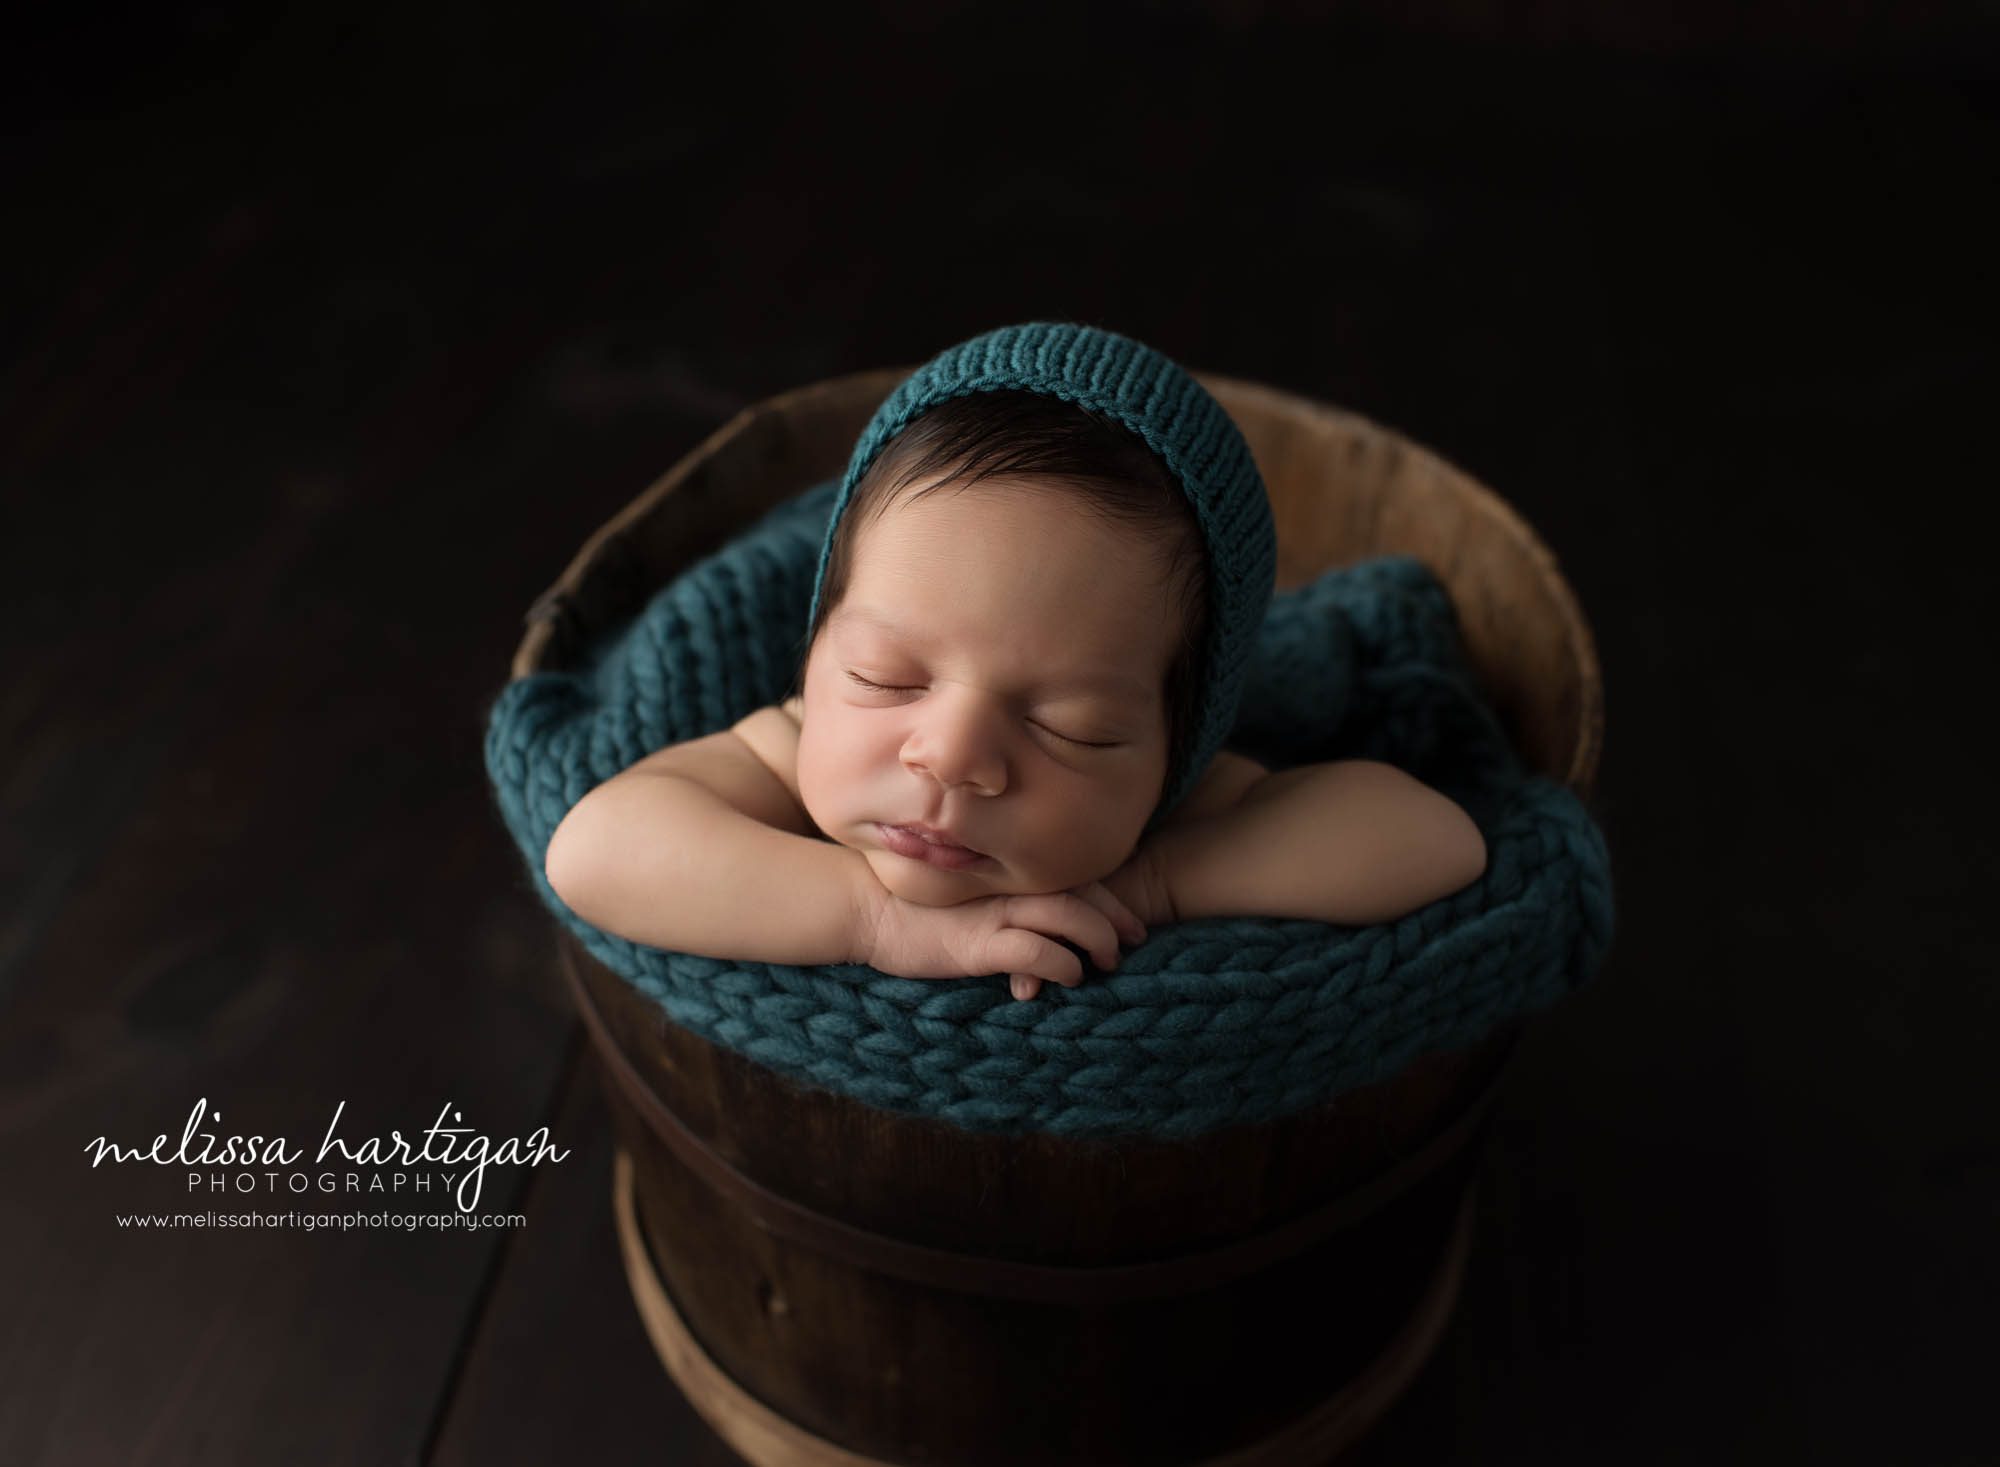 Melissa Hartigan Photography CT Newborn Photographer East Hartford baby boy sleeping in wooden bucket with blue knit blanket and hat